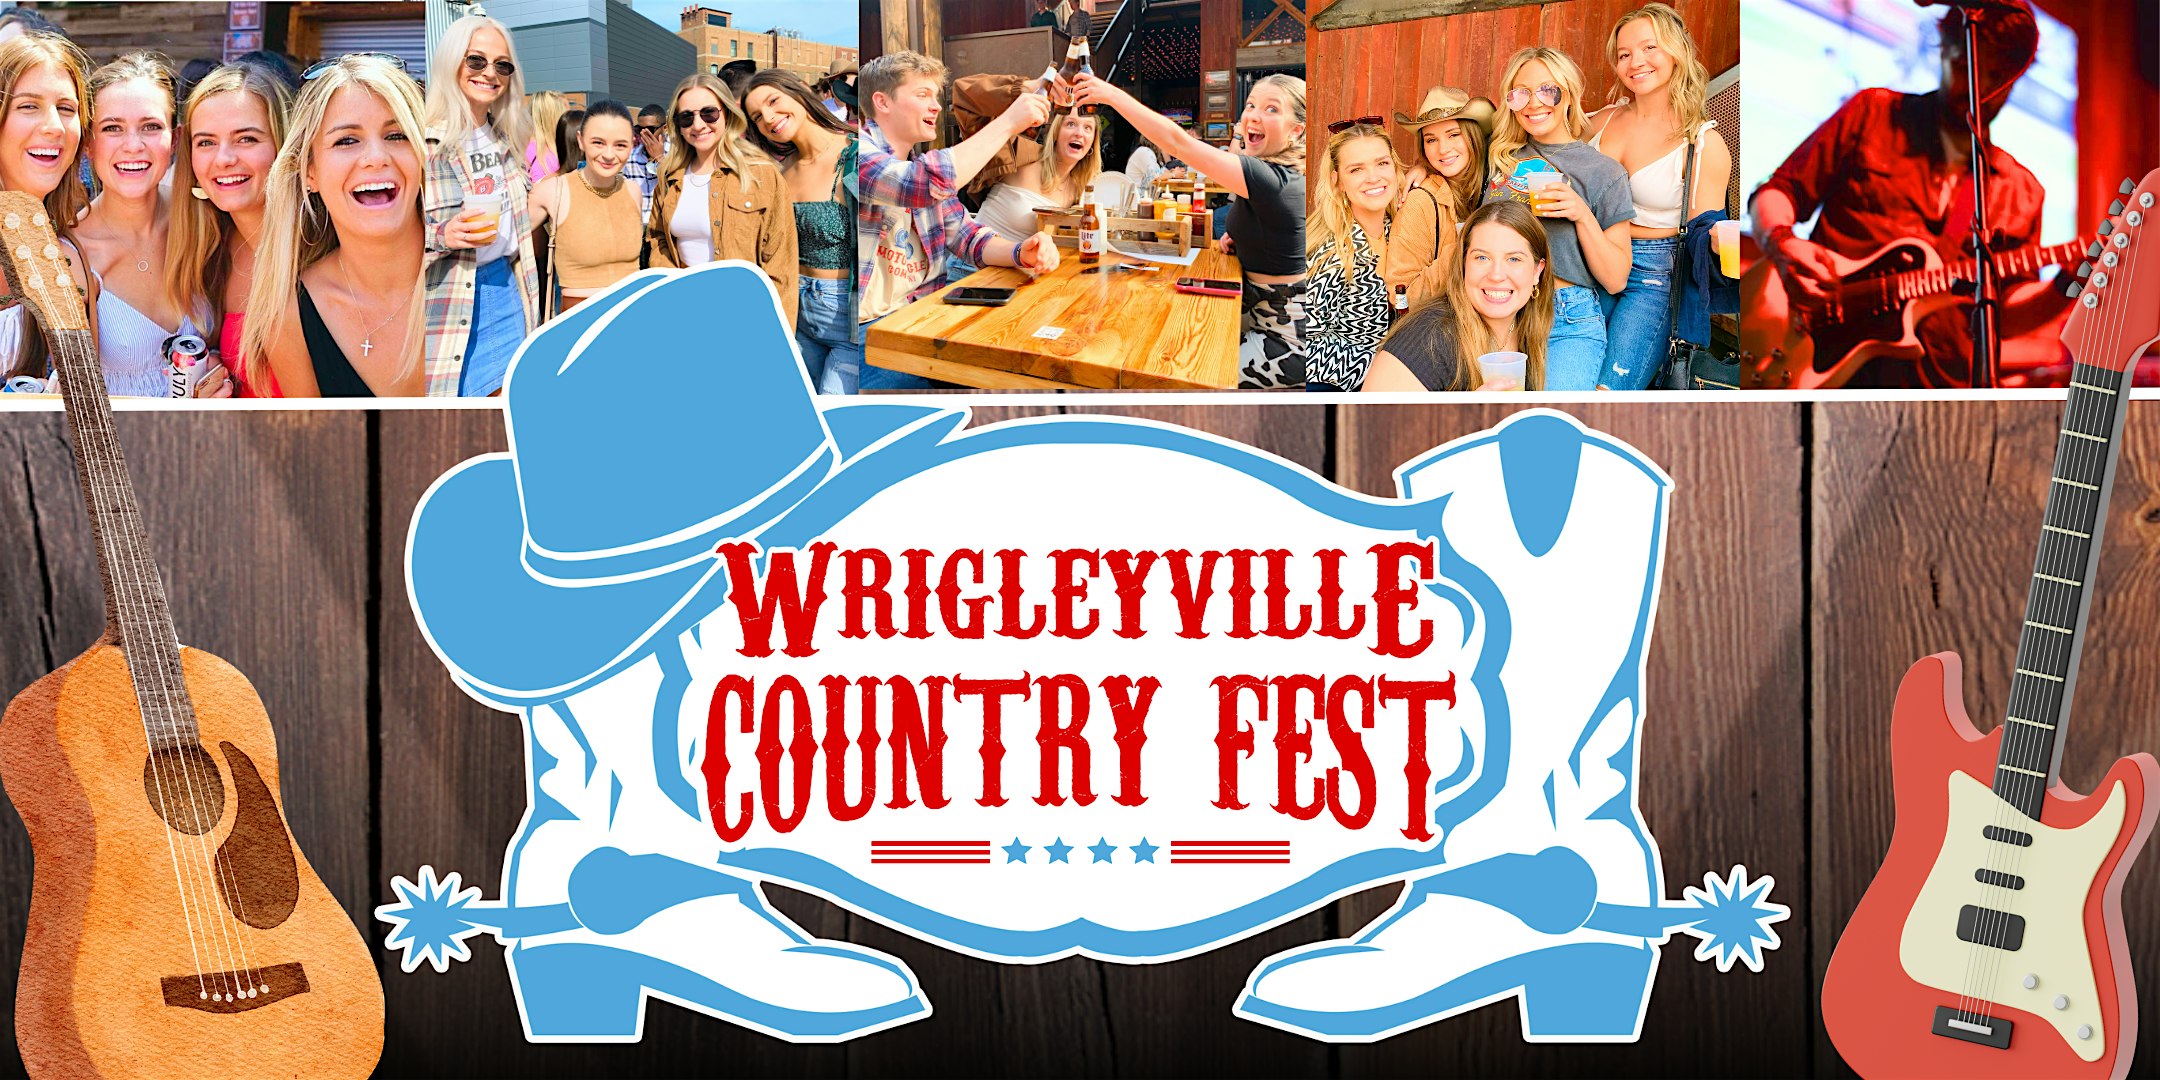 Wrigleyville Country Fest - Live Bands, BBQ, Beer & More!